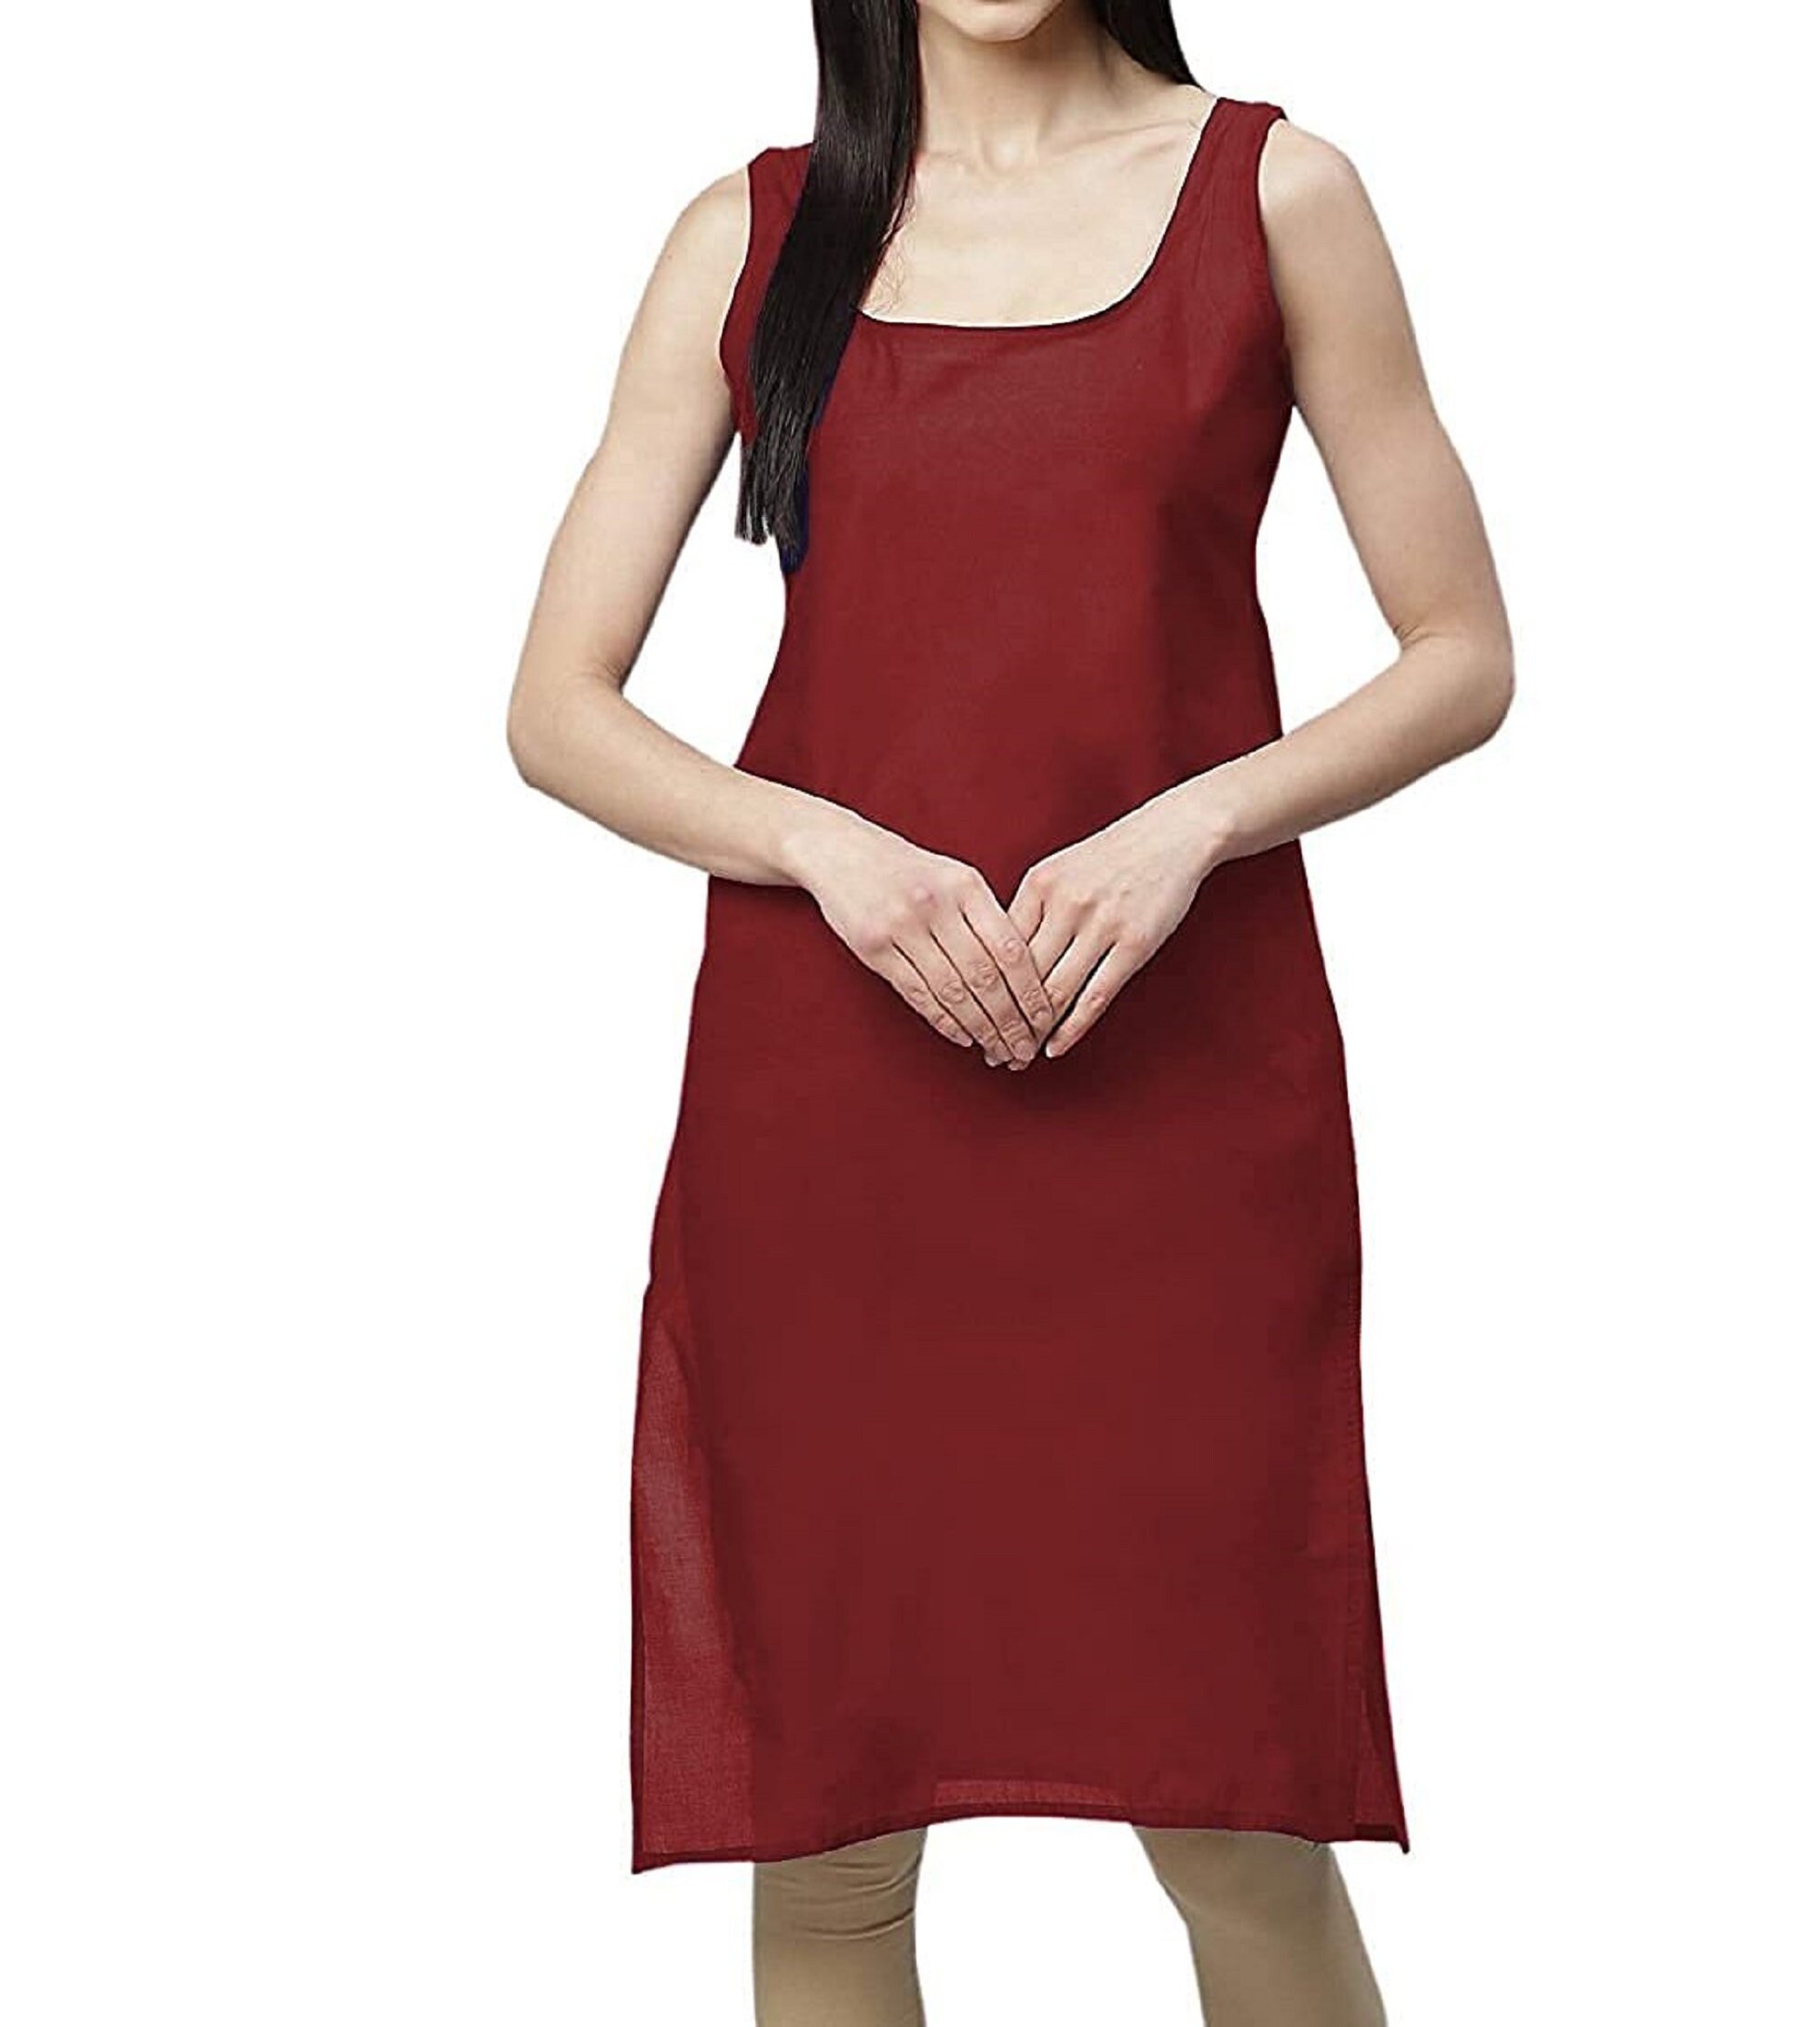 Buy ATTWACT Long Kurti Slip for Women-Cotton Camisoles for Ladies-Womens  Innerwear Long Camisoles with Broad Shoulder Slits-S at Amazon.in